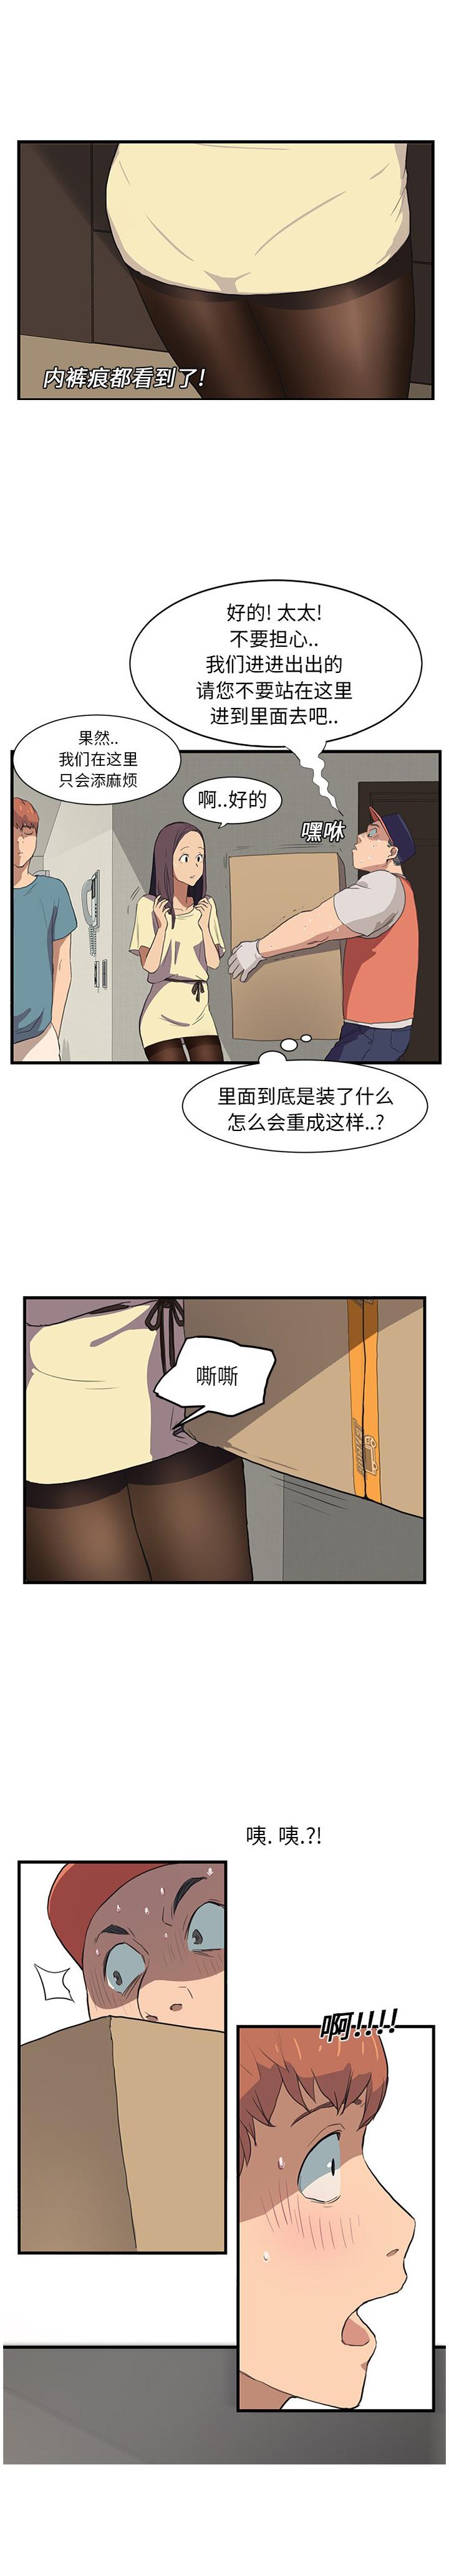 Relax 继母 1-8 Chinese Paja - Page 11